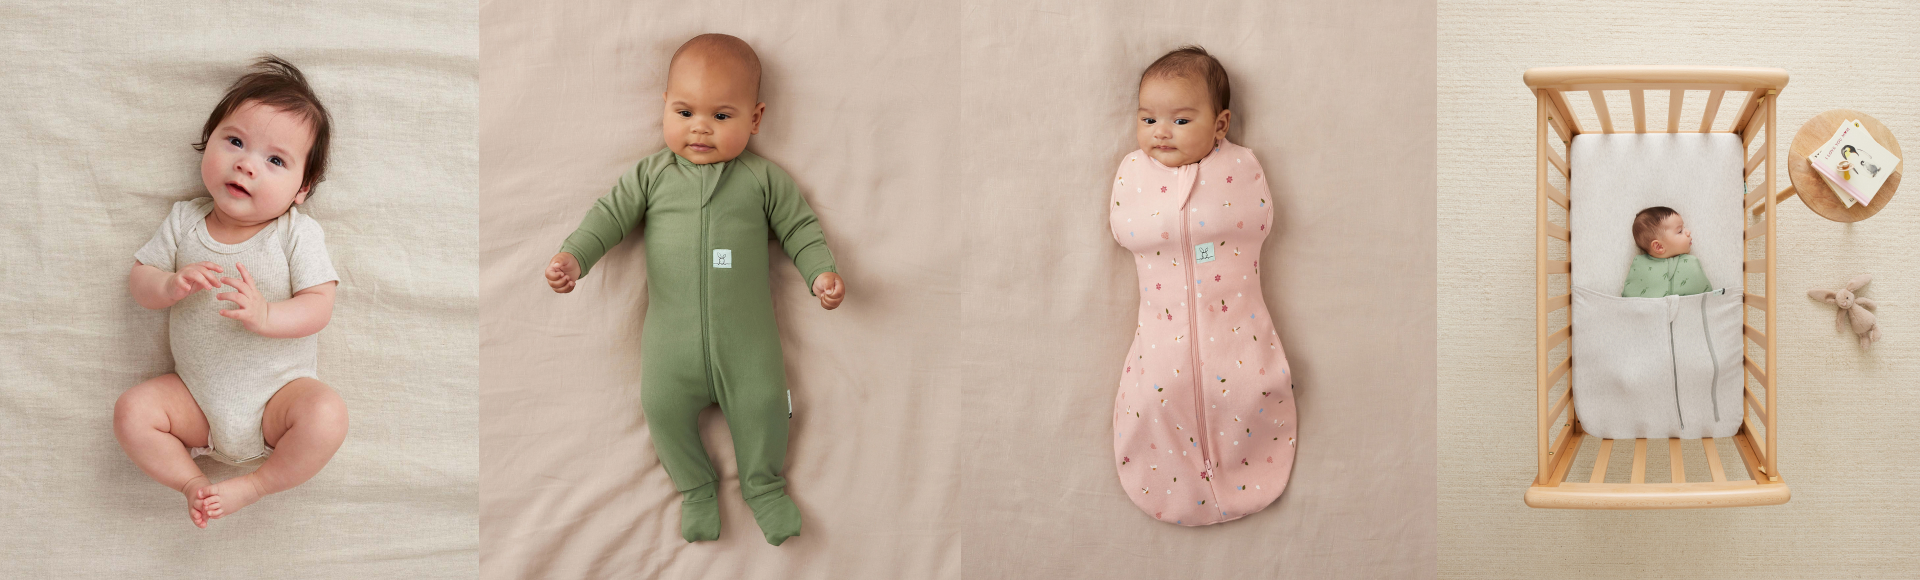 ergoPouch TOG-rated sleepwear for babies and toddlers